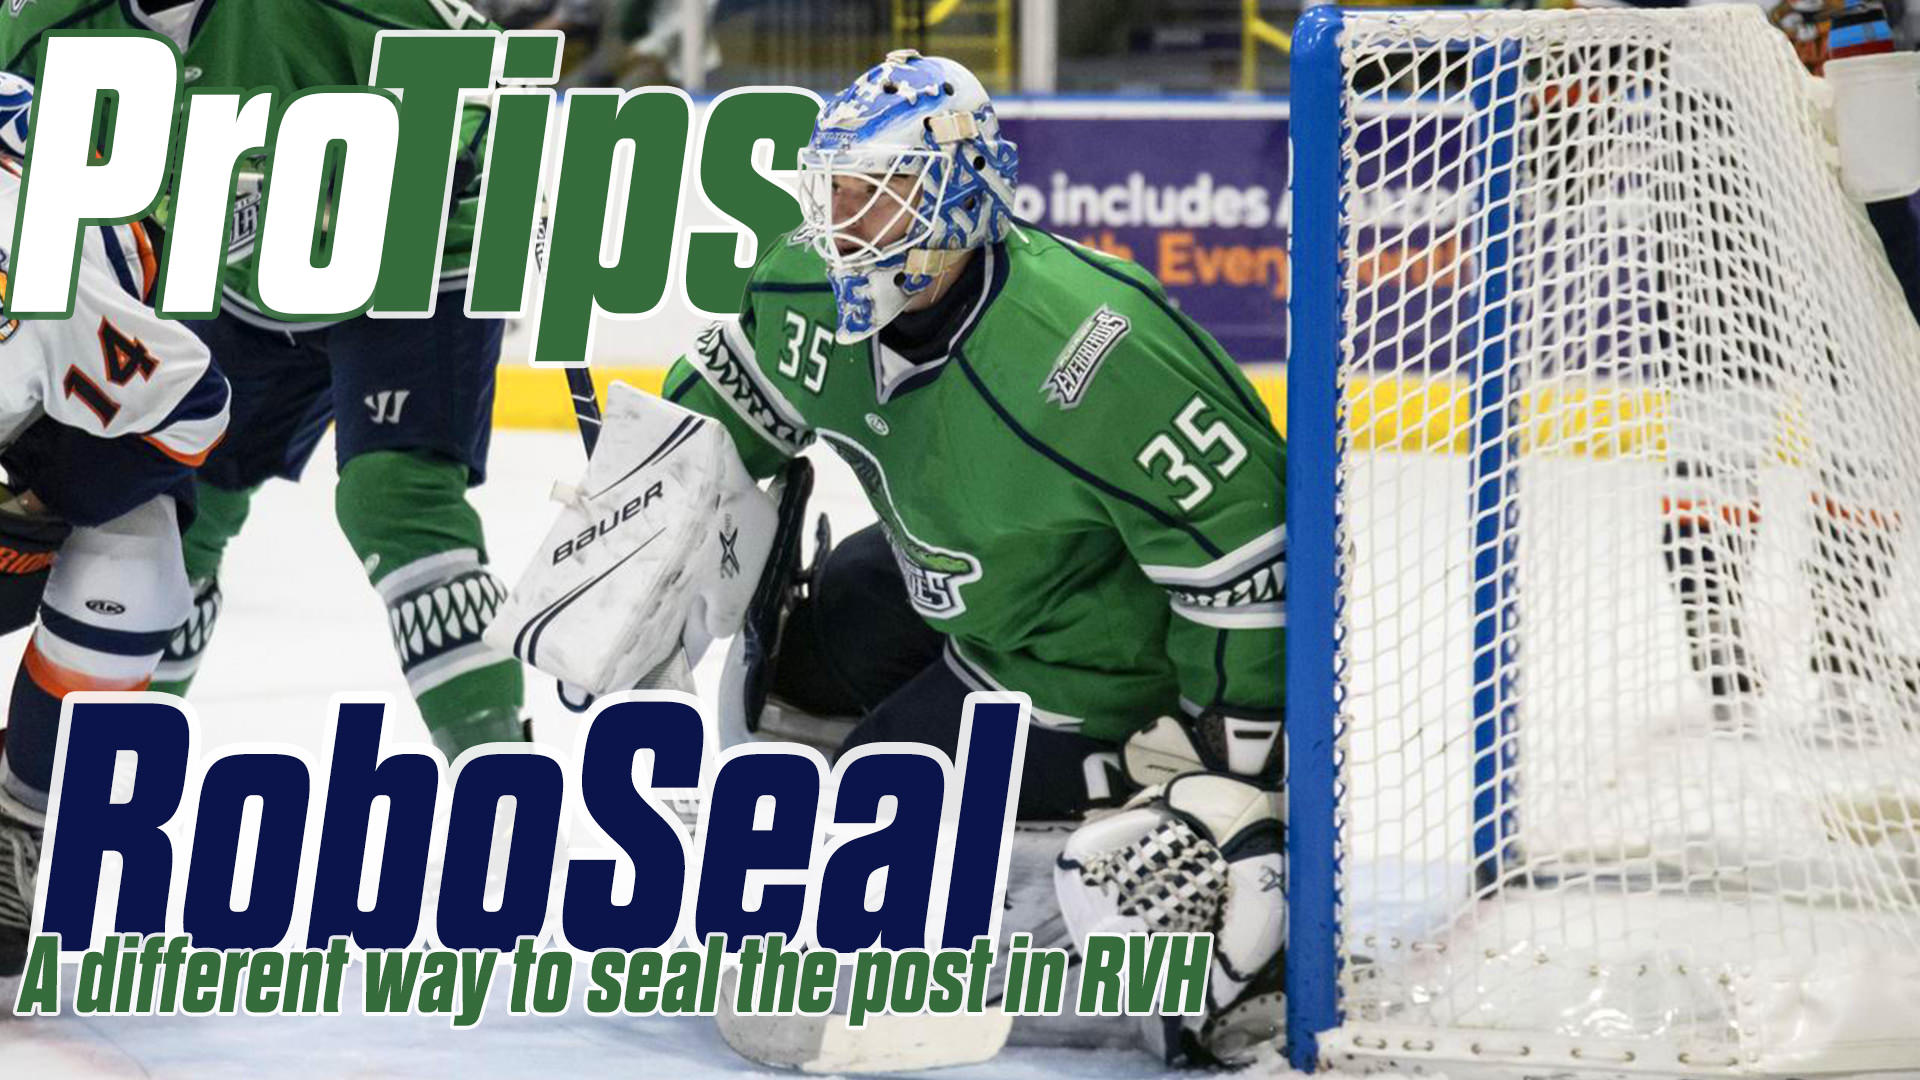 RoboSeal: New way to close costly RVH gaps with skate on post